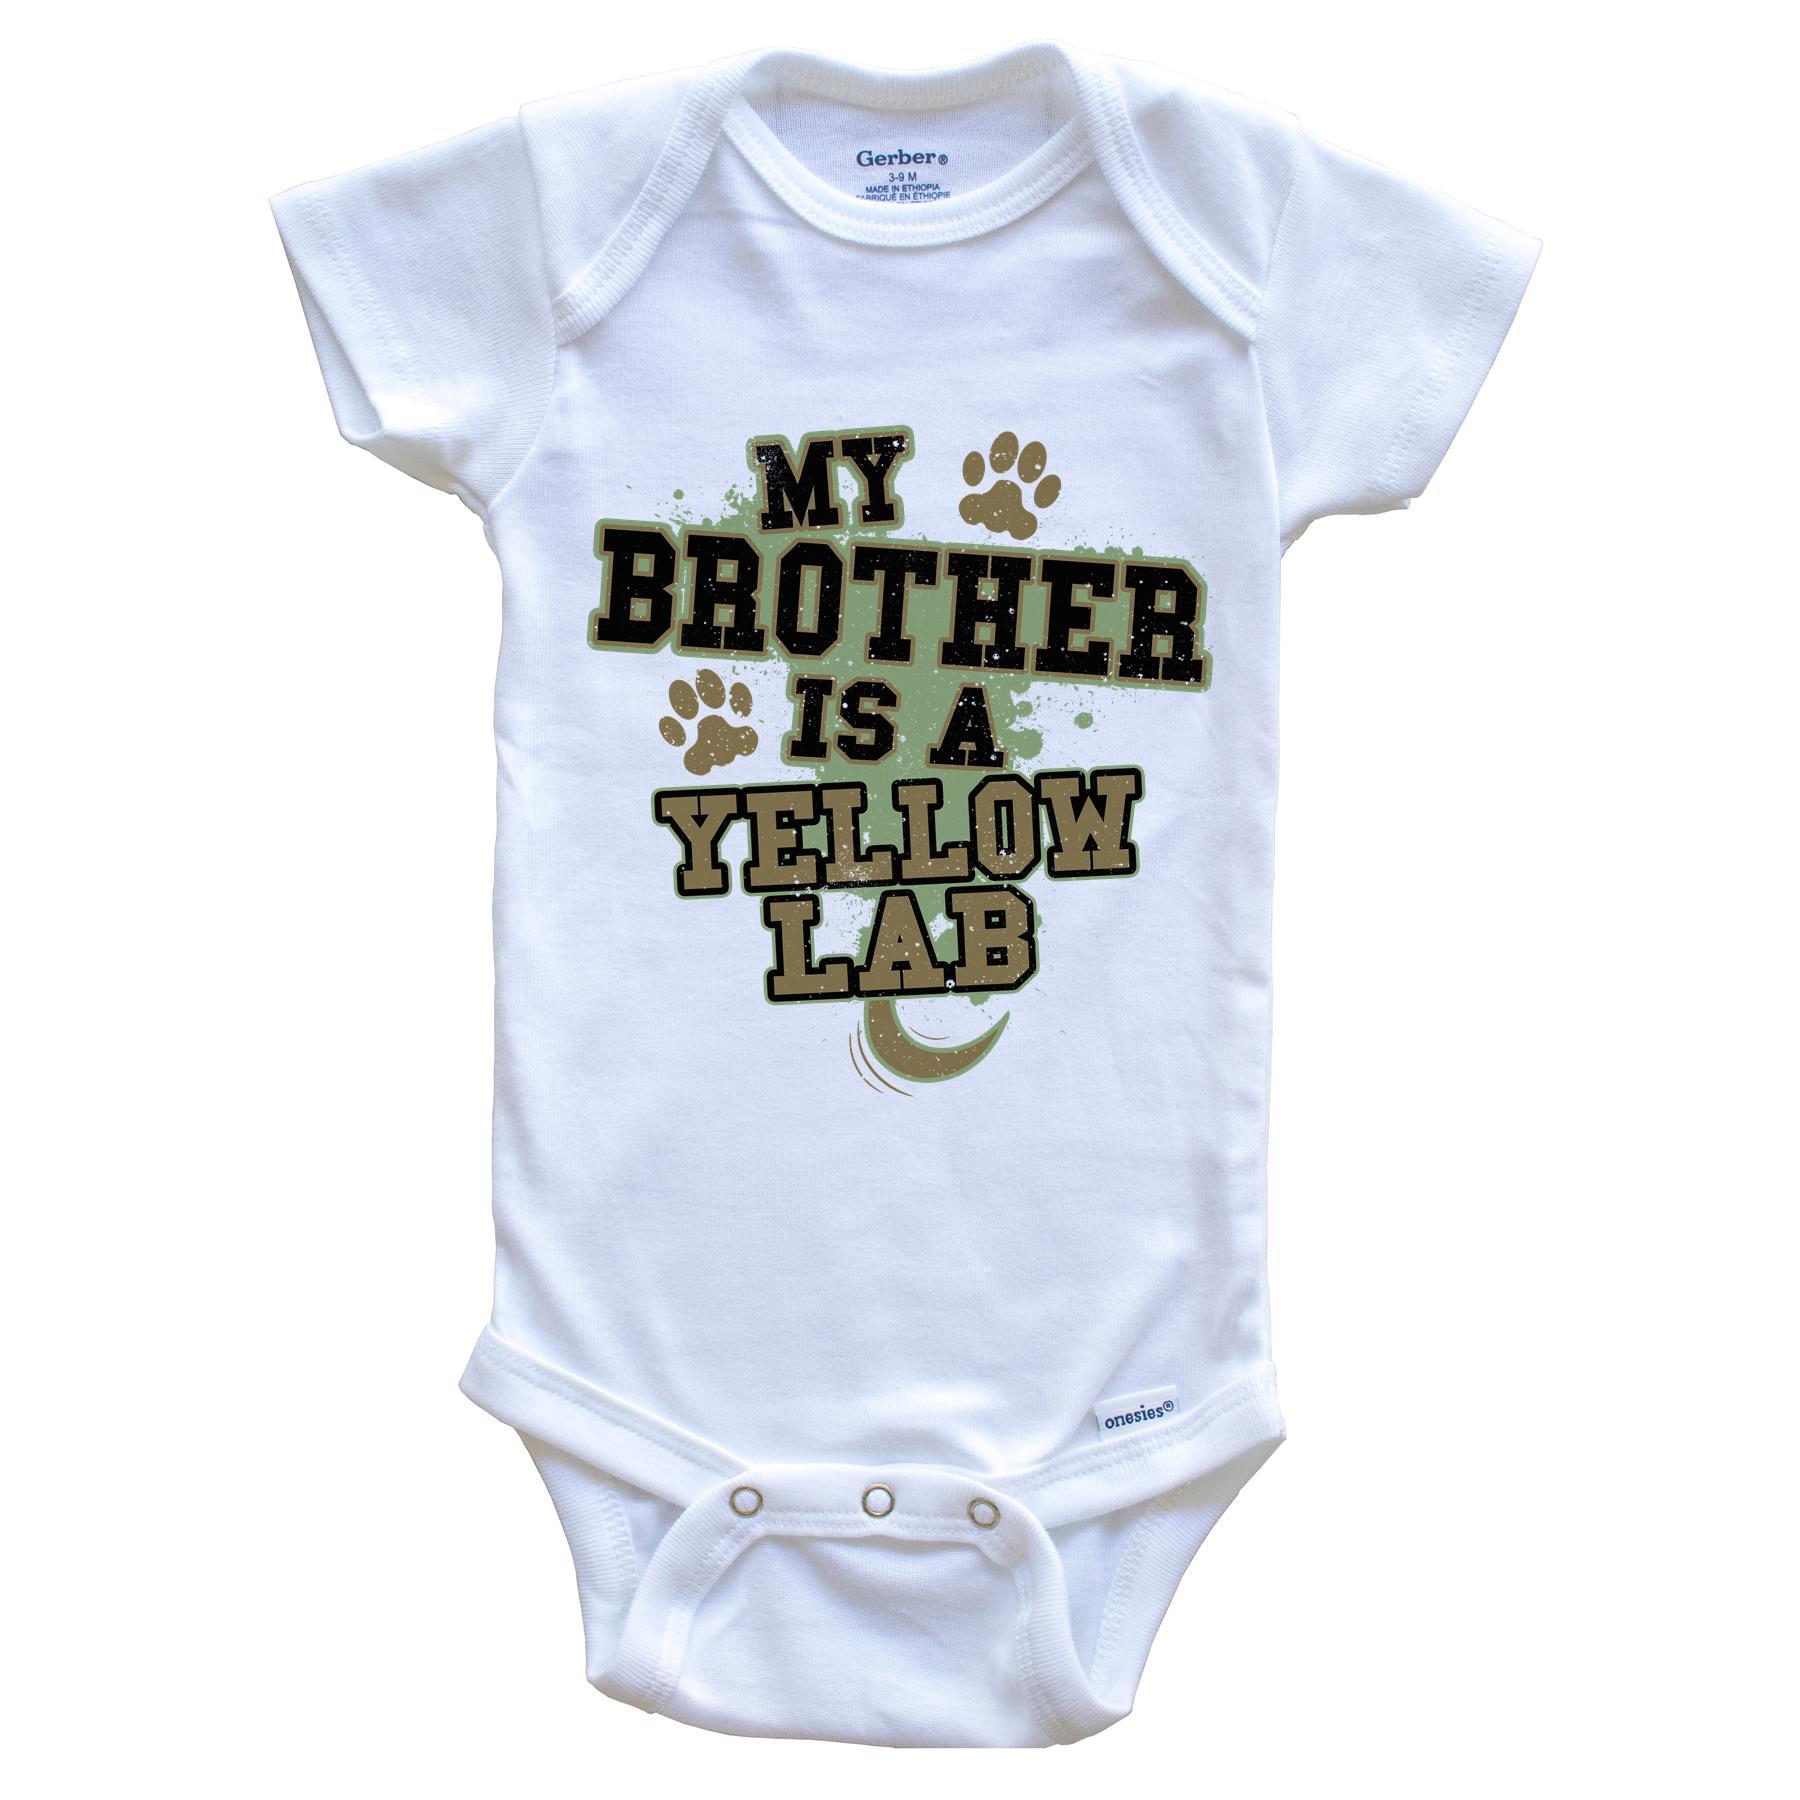 My Brother Is A Yellow Lab Funny Dog Baby Onesie